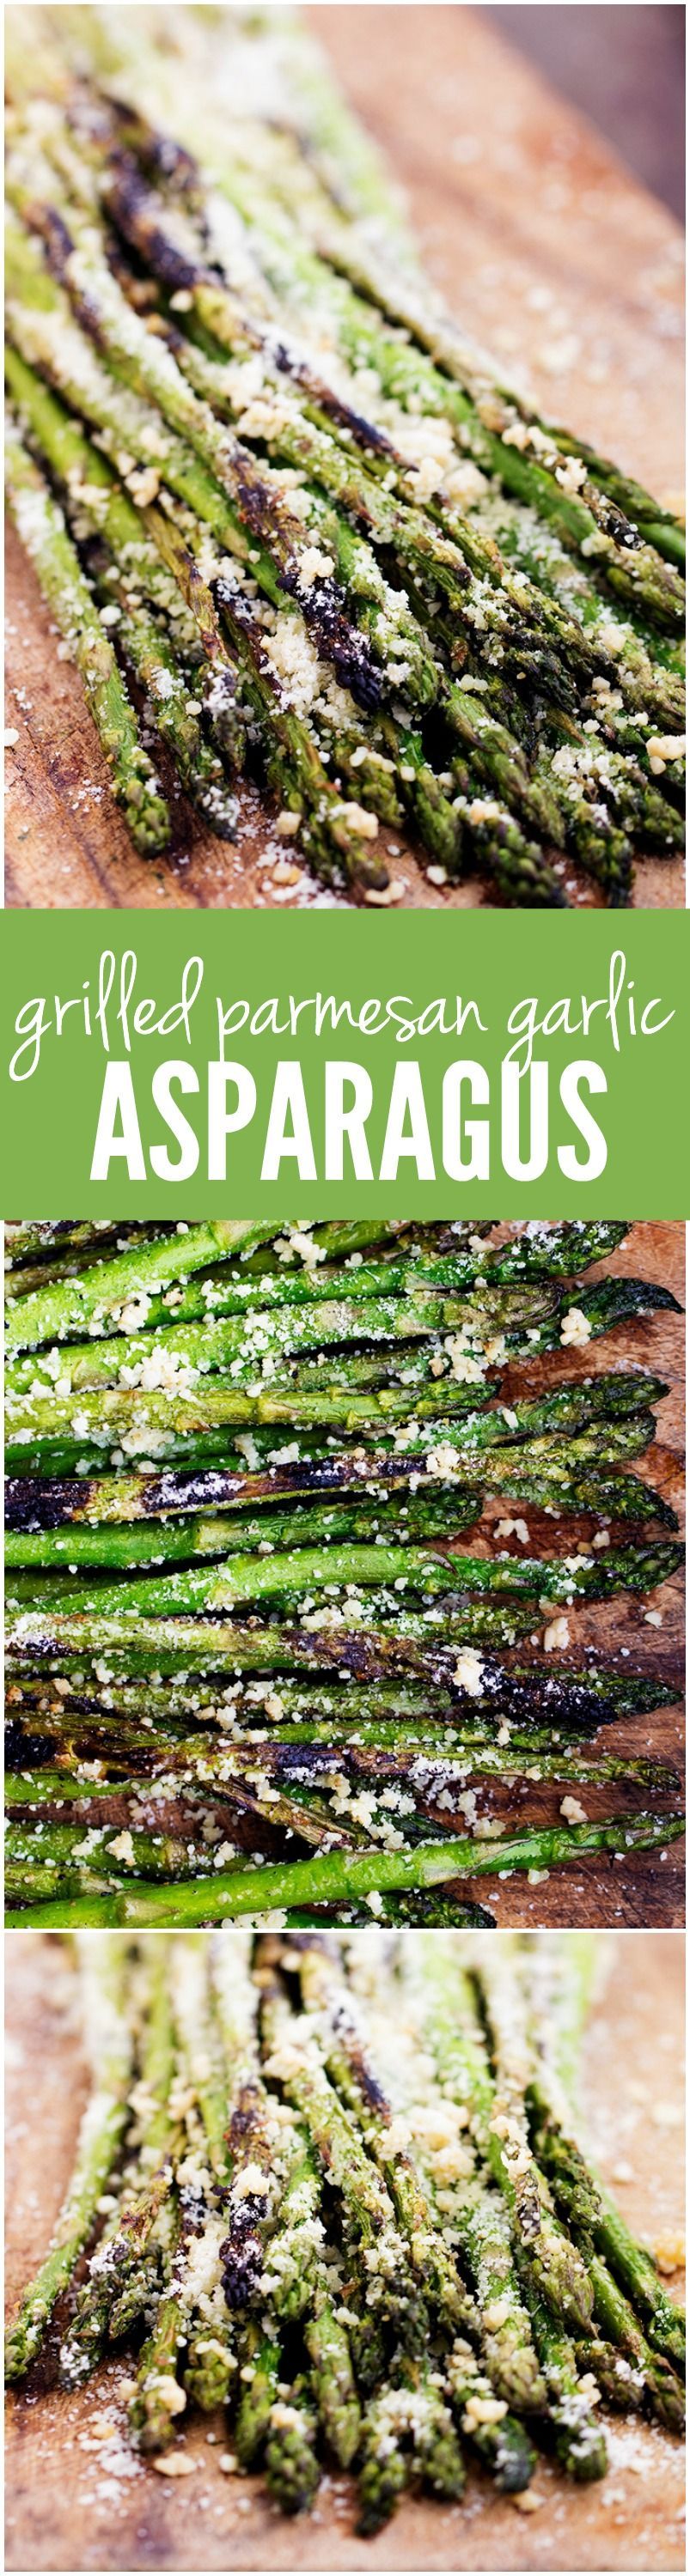 This Grilled Parmesan Garlic Asparagus is the BEST side! The smoky charred edges add so much delicious flavor to this tender asparagus! -   21 grilled asparagus recipes
 ideas